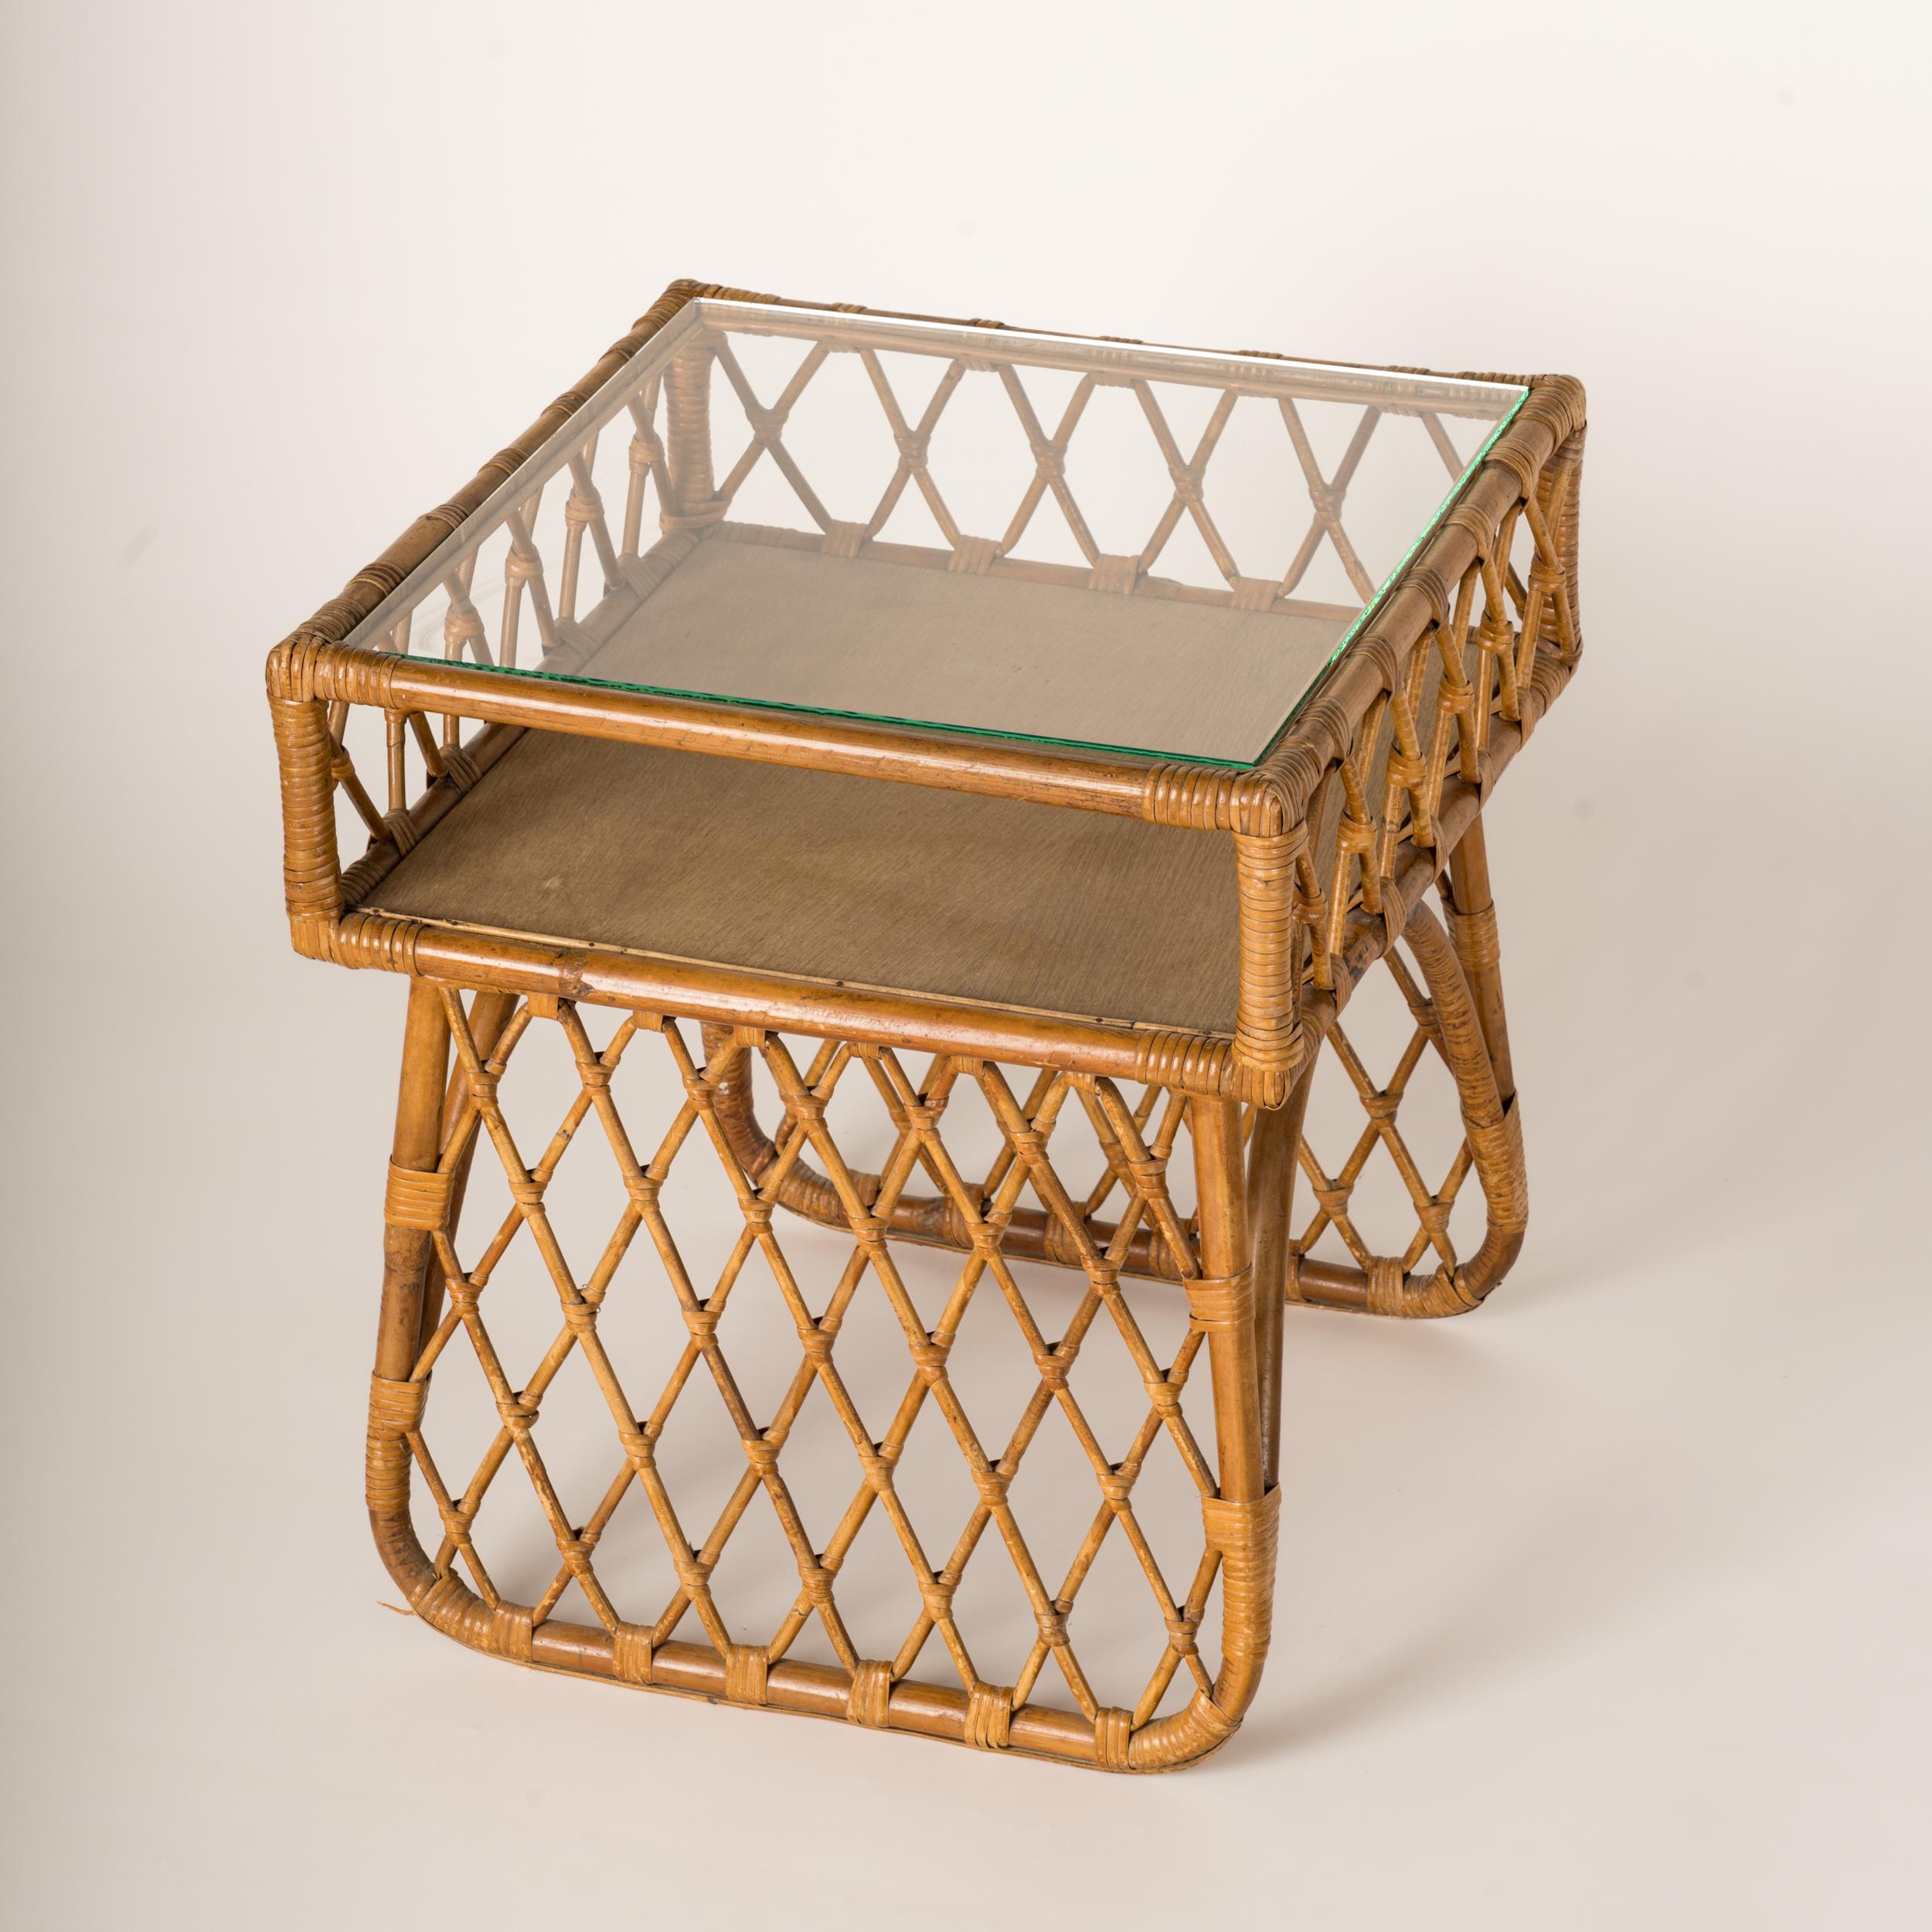 Elegantly braided natural color rattan side table or bedside table with a glass top. Attributed to Louis Sognot, a French designer from the 1950's who designed several rattan pieces of furniture and lighting.
This table will ship from France and ca